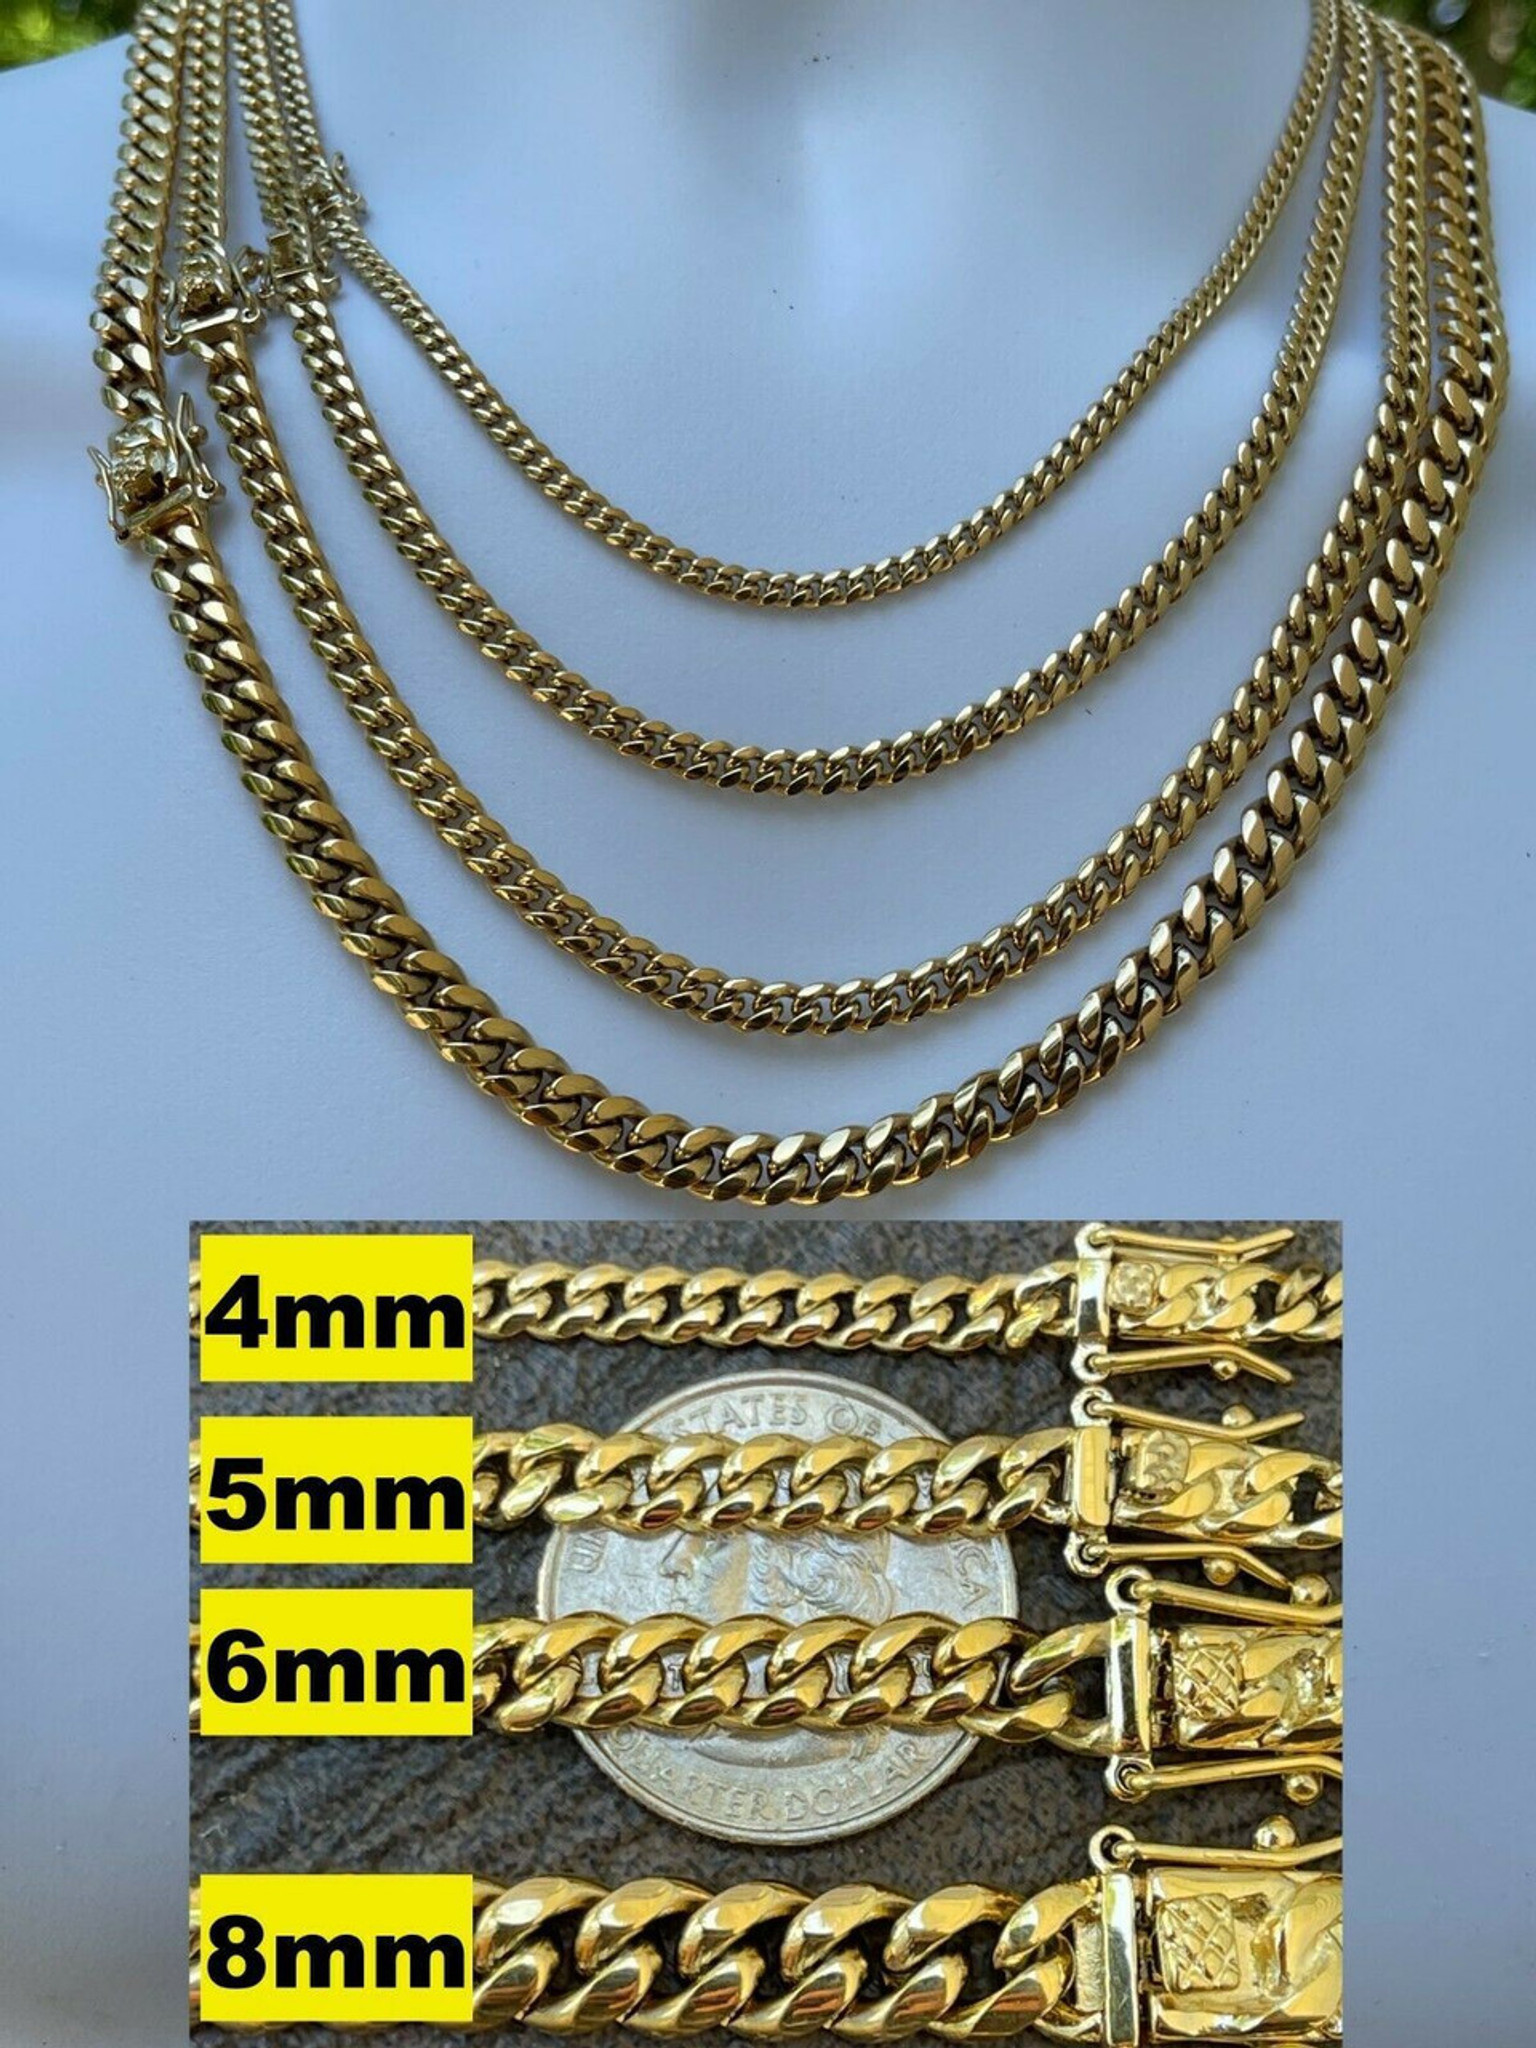 14k Yellow Gold Miami Cuban Link Chain 6mm 30 Necklace Box Lock